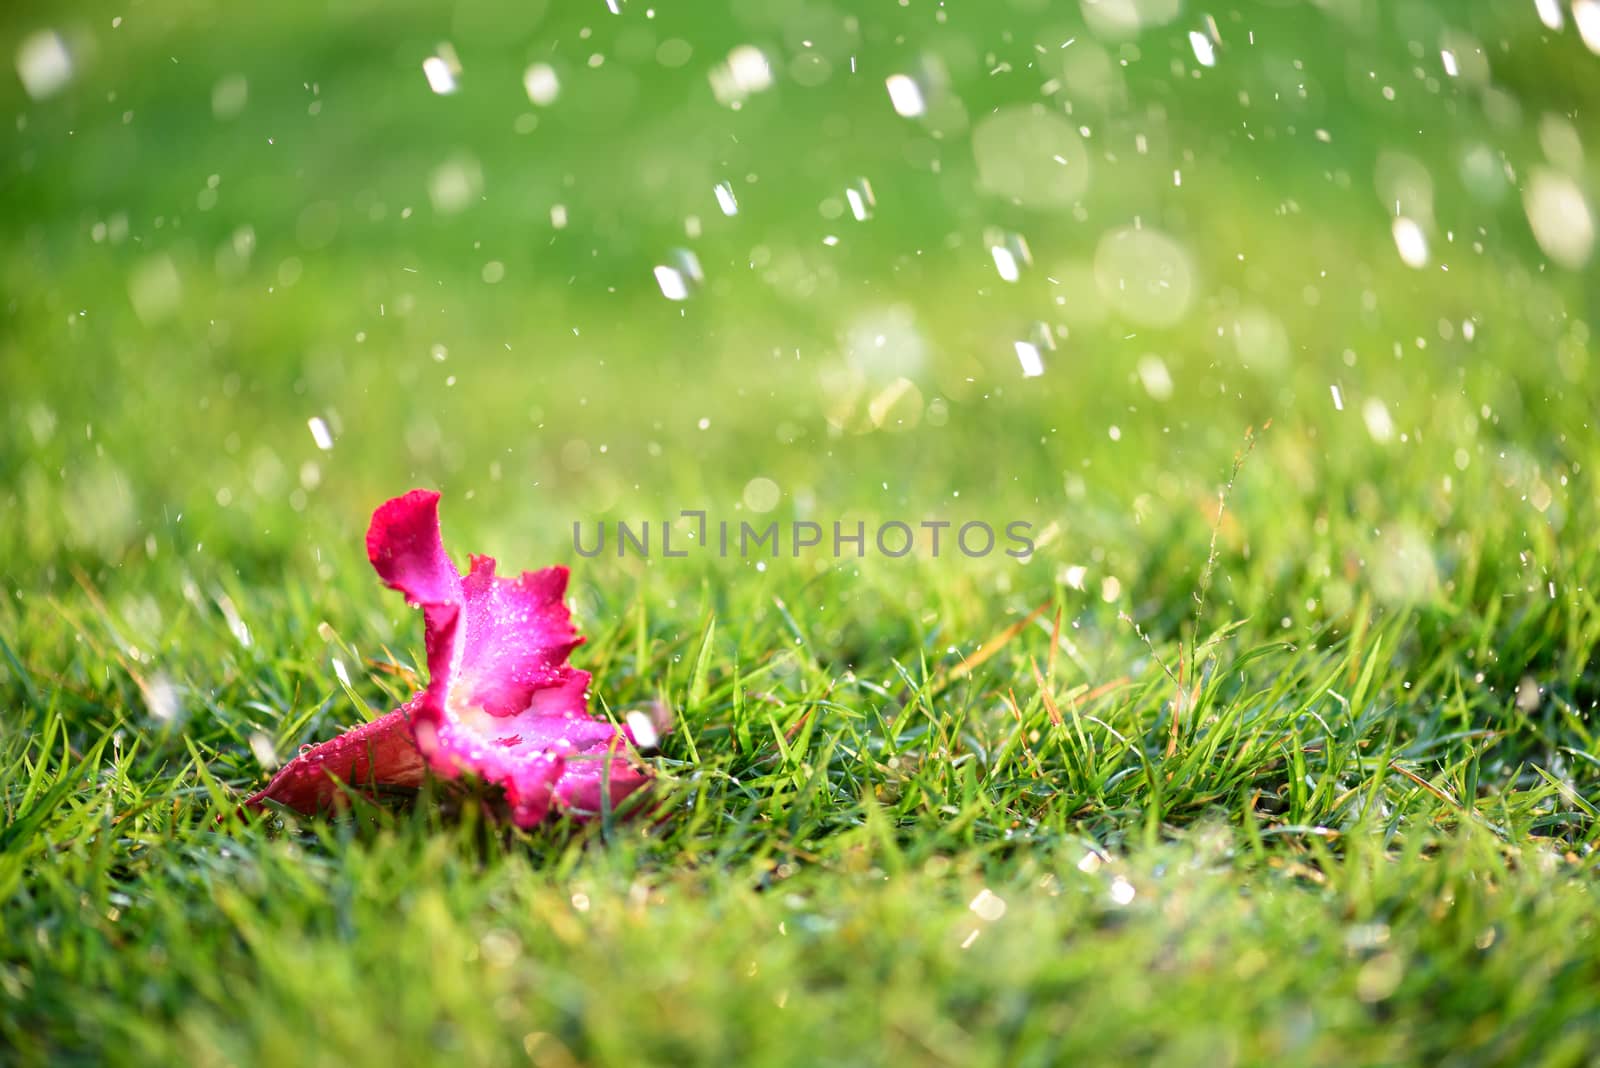 Soft focus of Close up on alone Pink flower with heavy raining on green grass field in Fresh morning natural background. World Water Day and sadness, lonely concept.